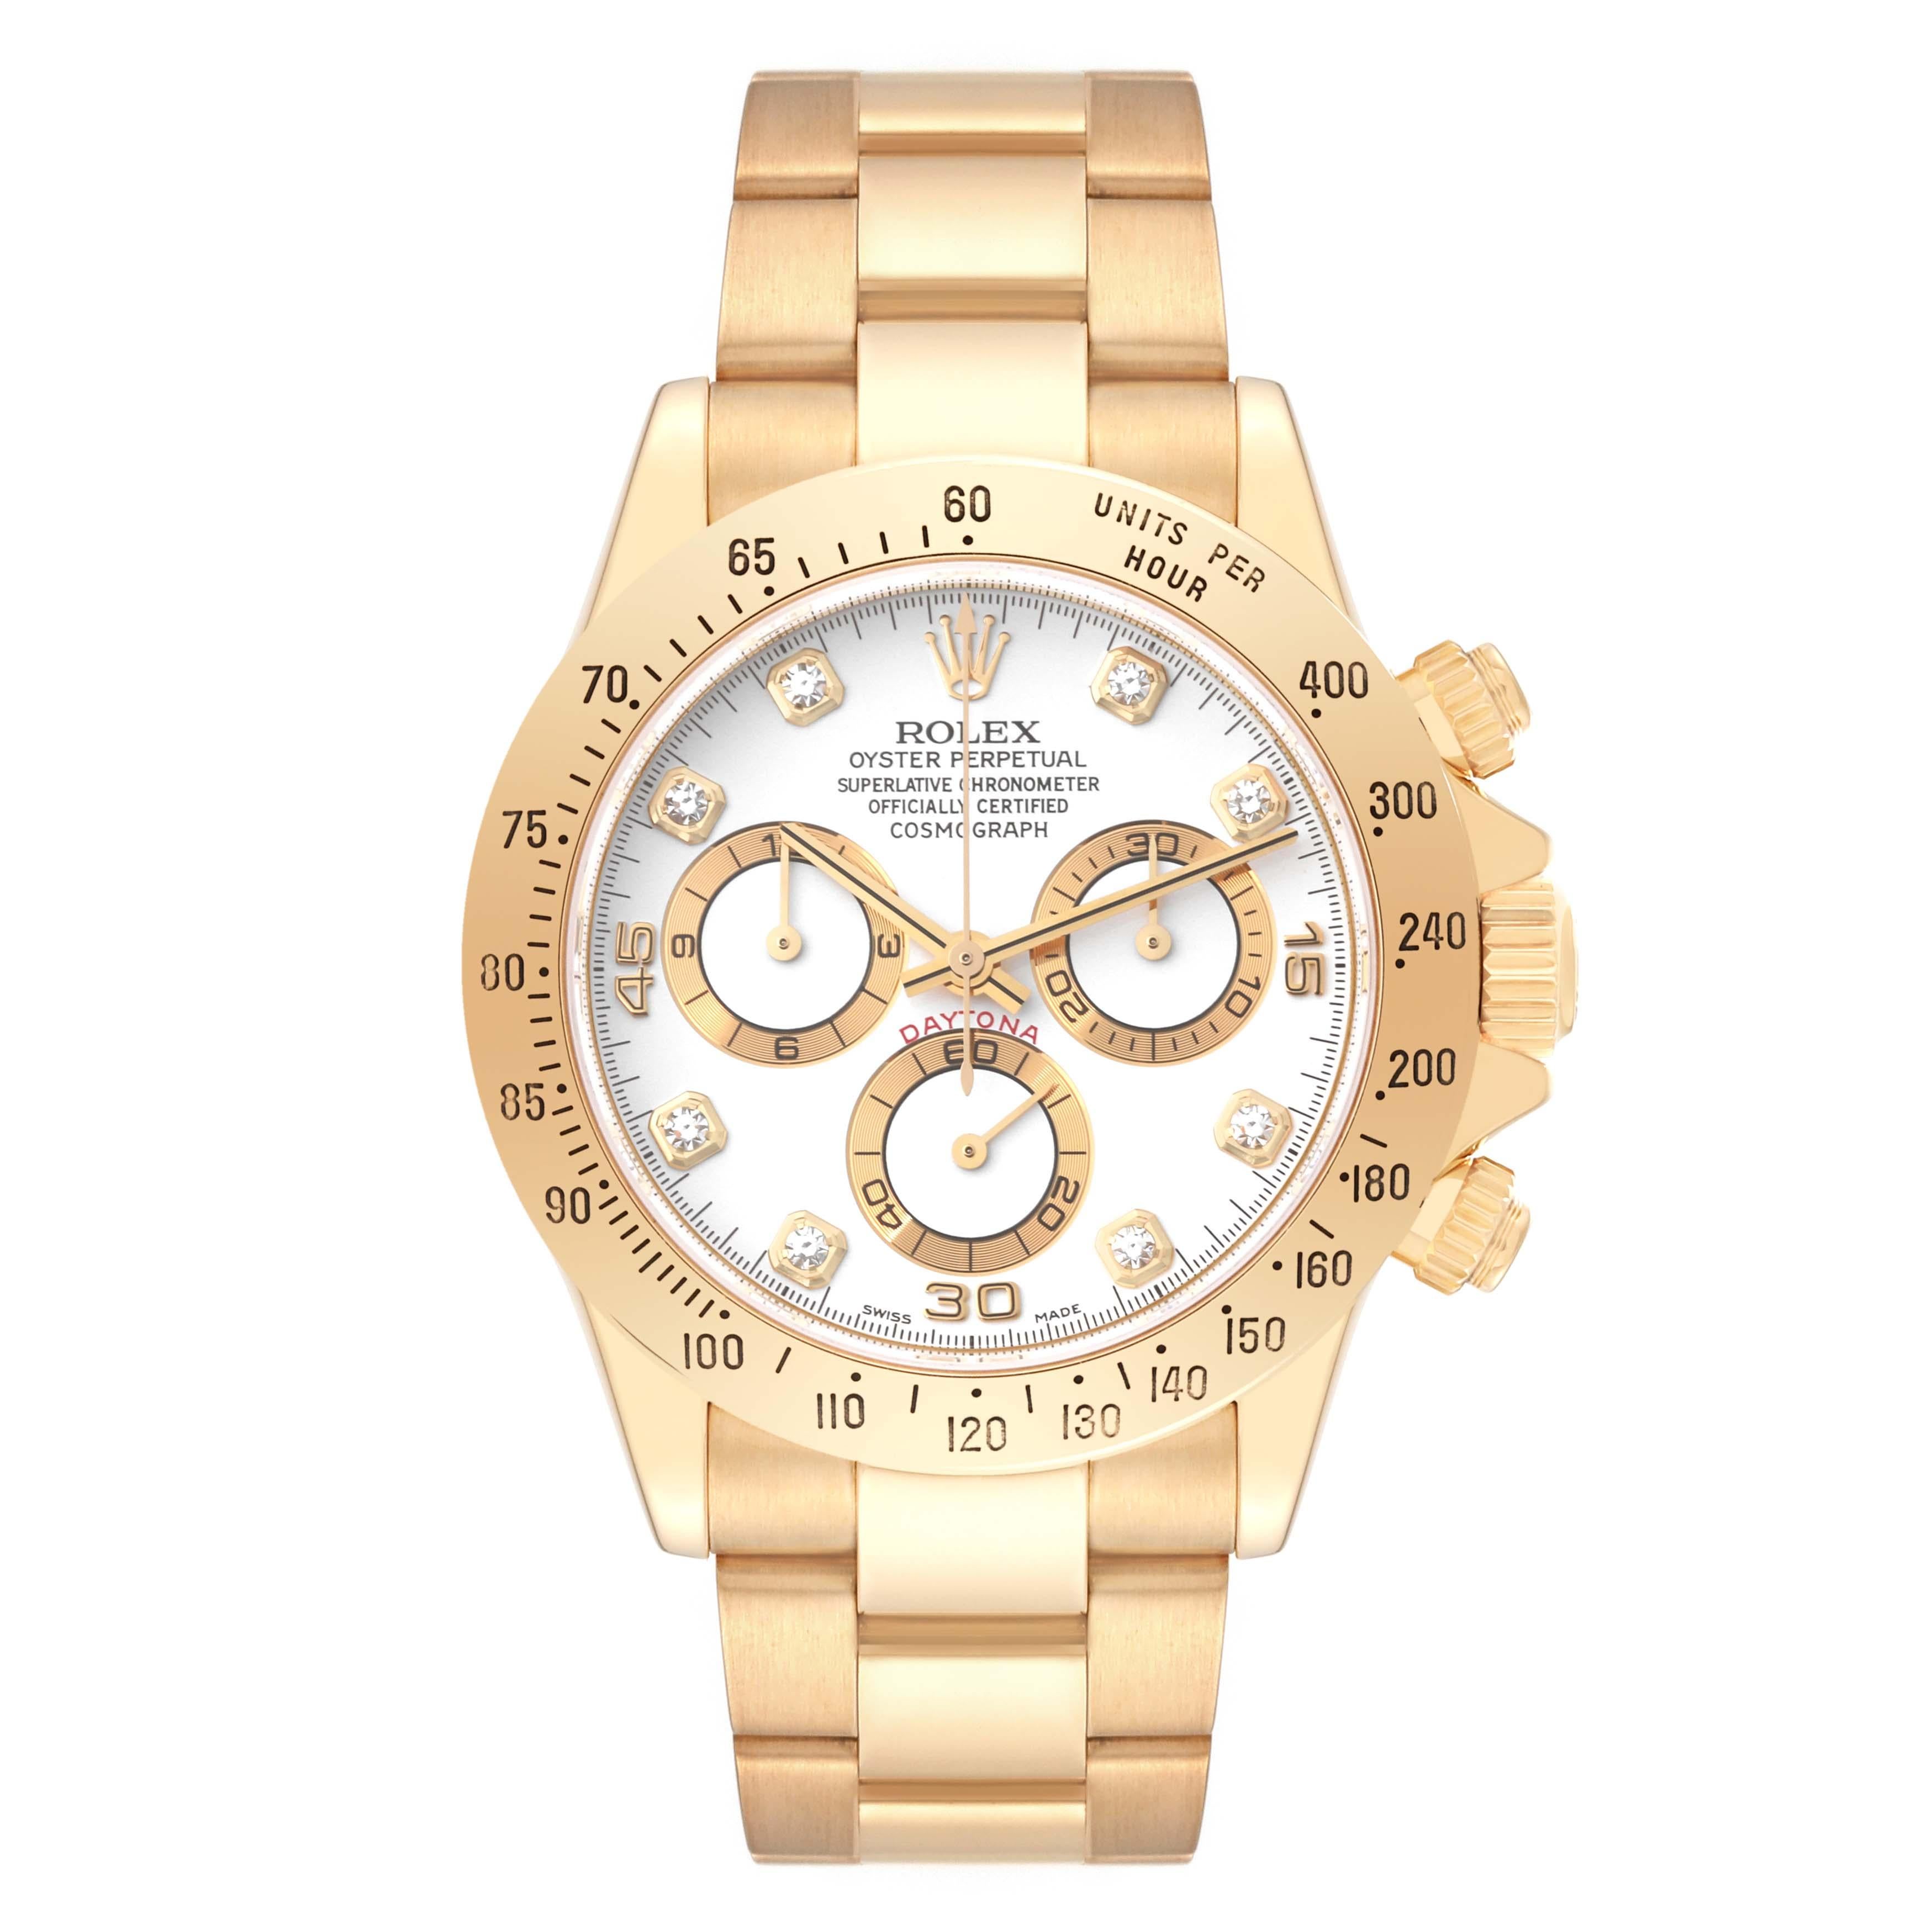 Rolex Daytona Yellow Gold White Diamond Dial Mens Watch 116528 Box Papers In Excellent Condition For Sale In Atlanta, GA